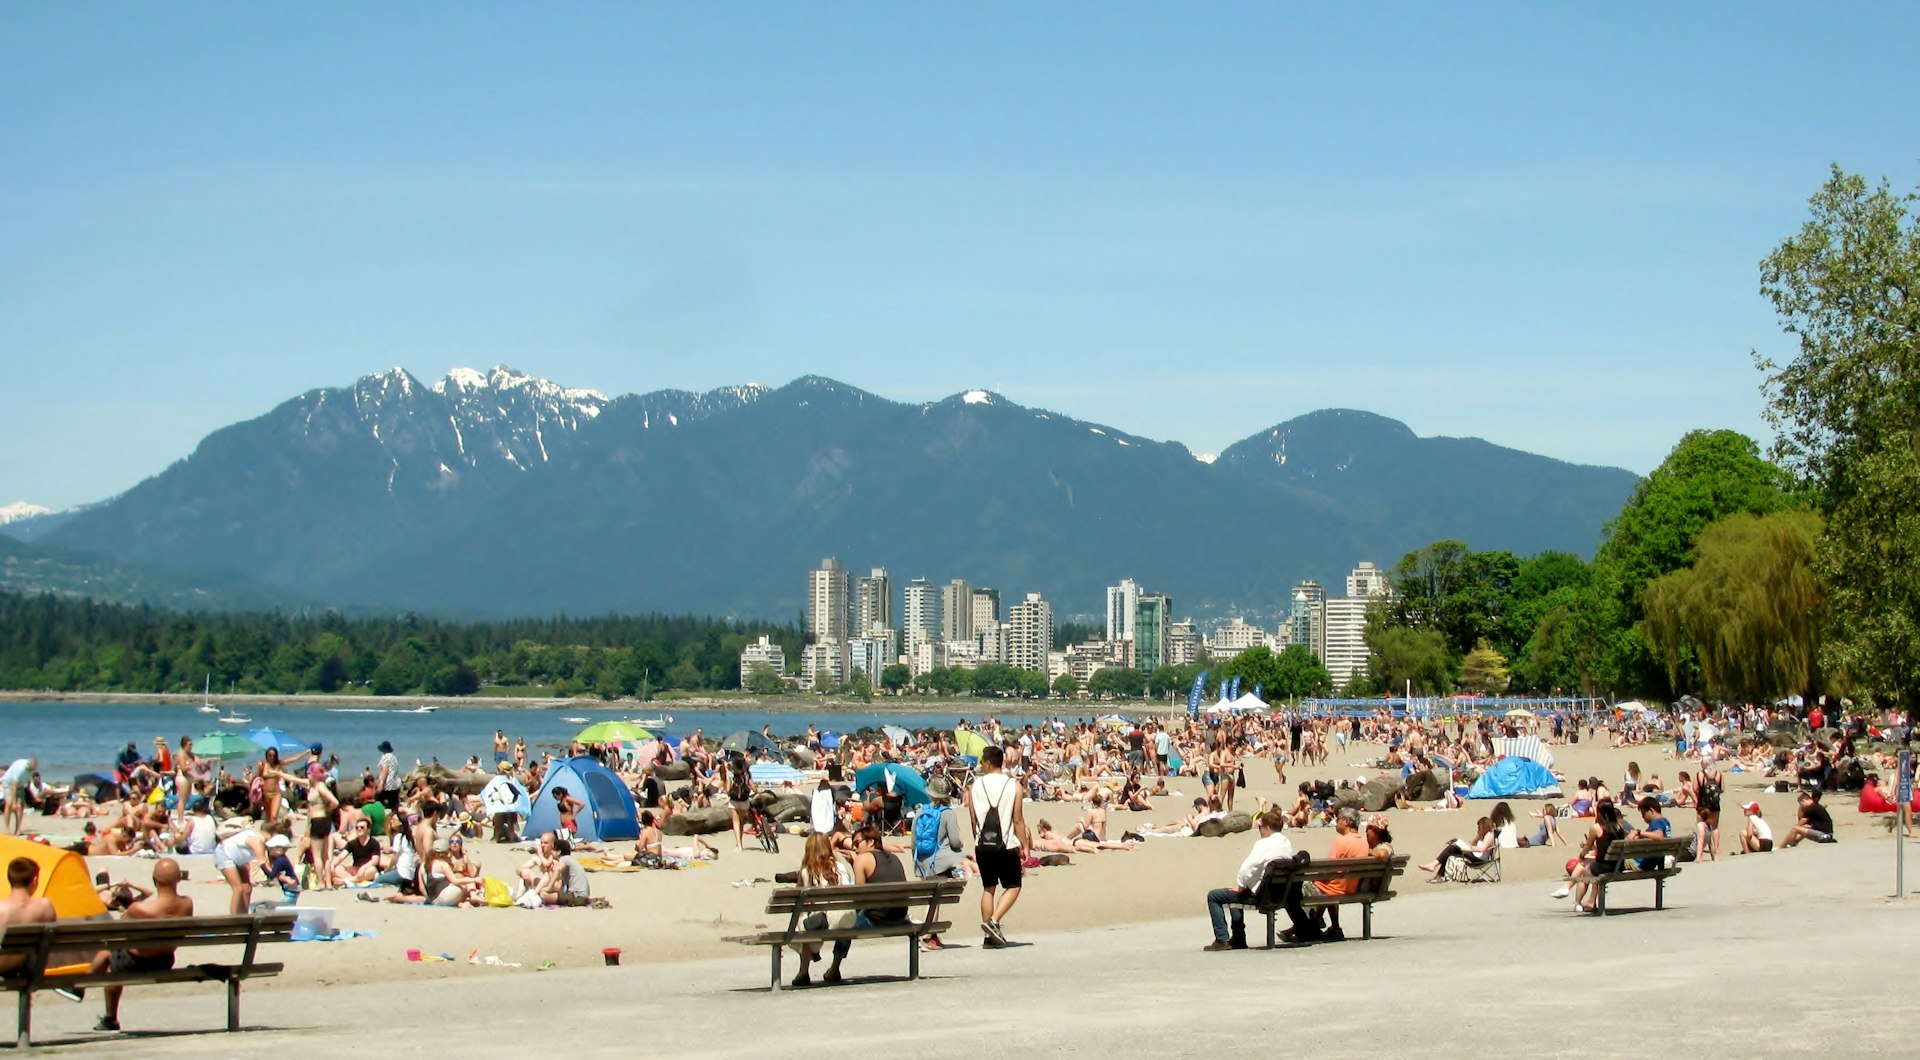 Groups of people relax on the beach with a city skyline and mountains in the distance